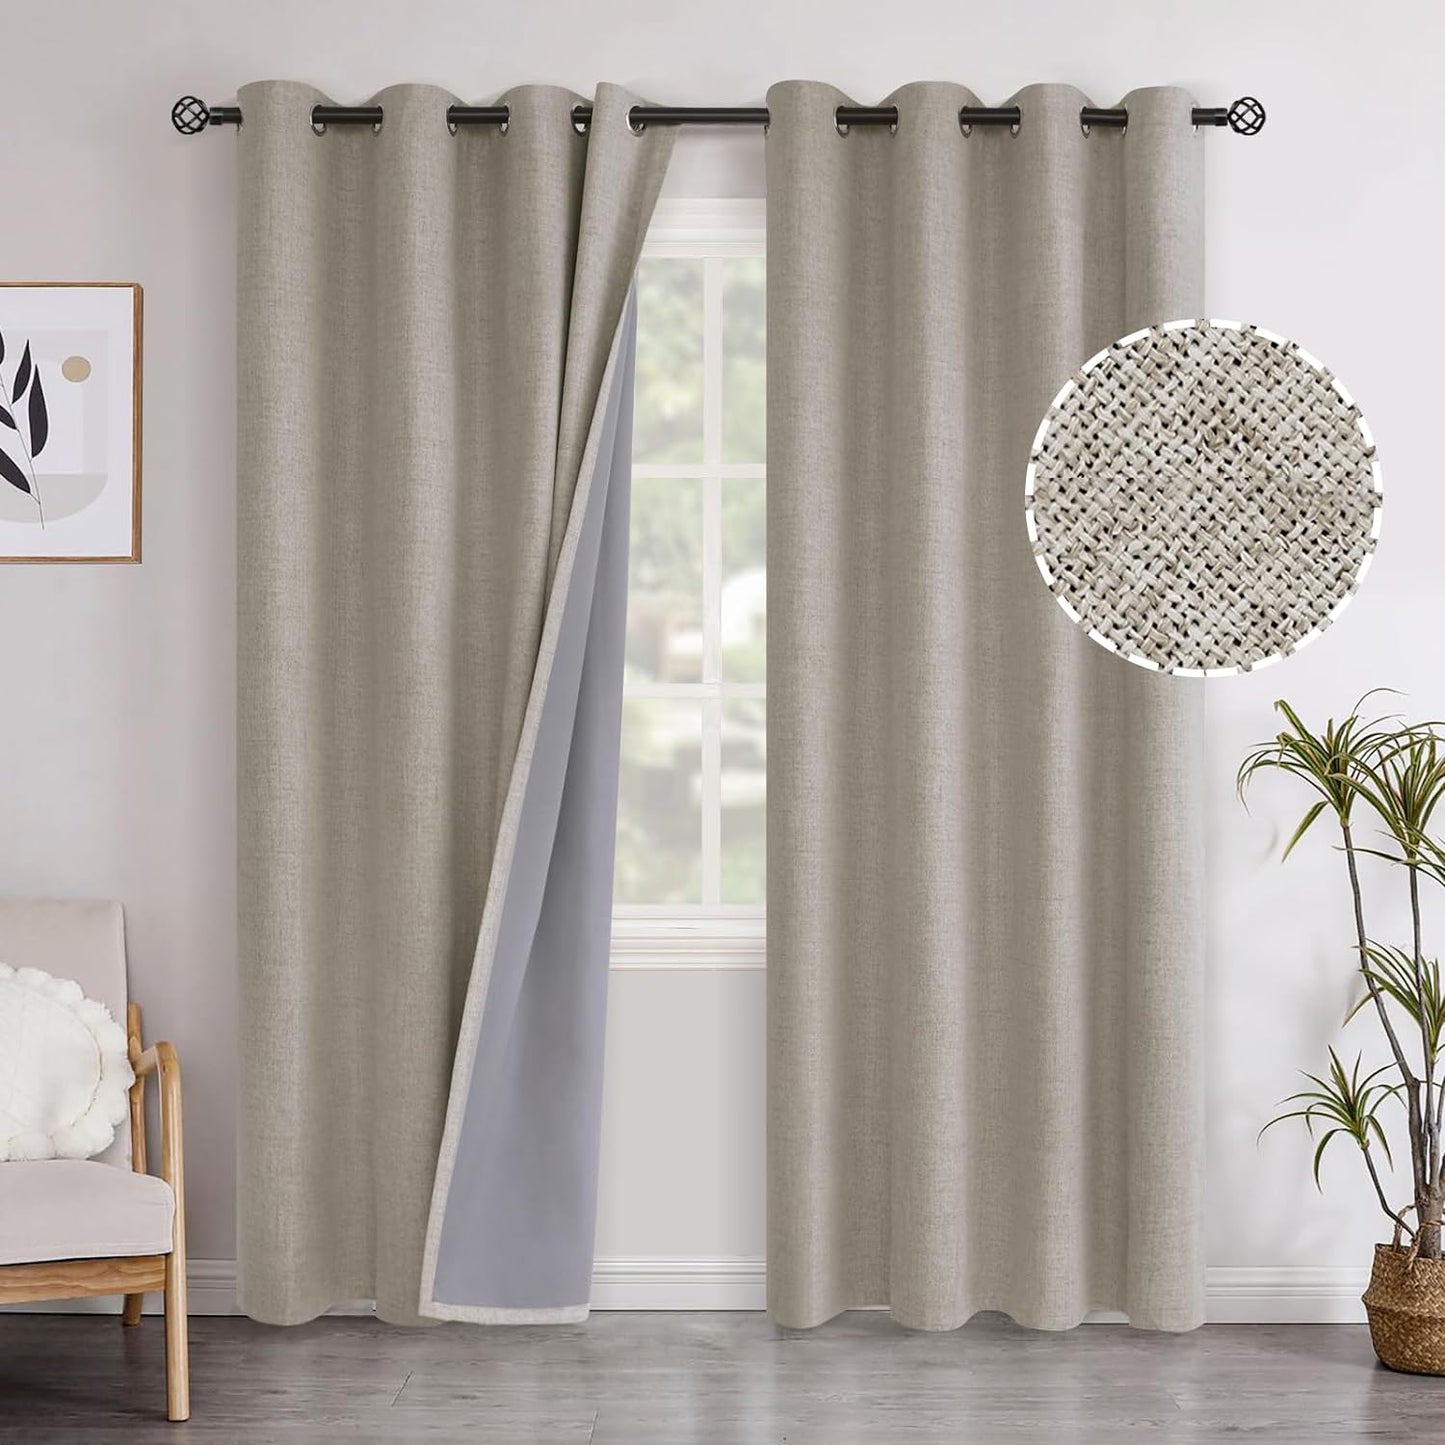 Youngstex Linen Blackout Curtains 63 Inch Length, Grommet Darkening Bedroom Curtains Burlap Linen Window Drapes Thermal Insulated for Basement Summer Heat, 2 Panels, 52 X 63 Inch, Beige  YoungsTex Cashmere 52W X 84L 